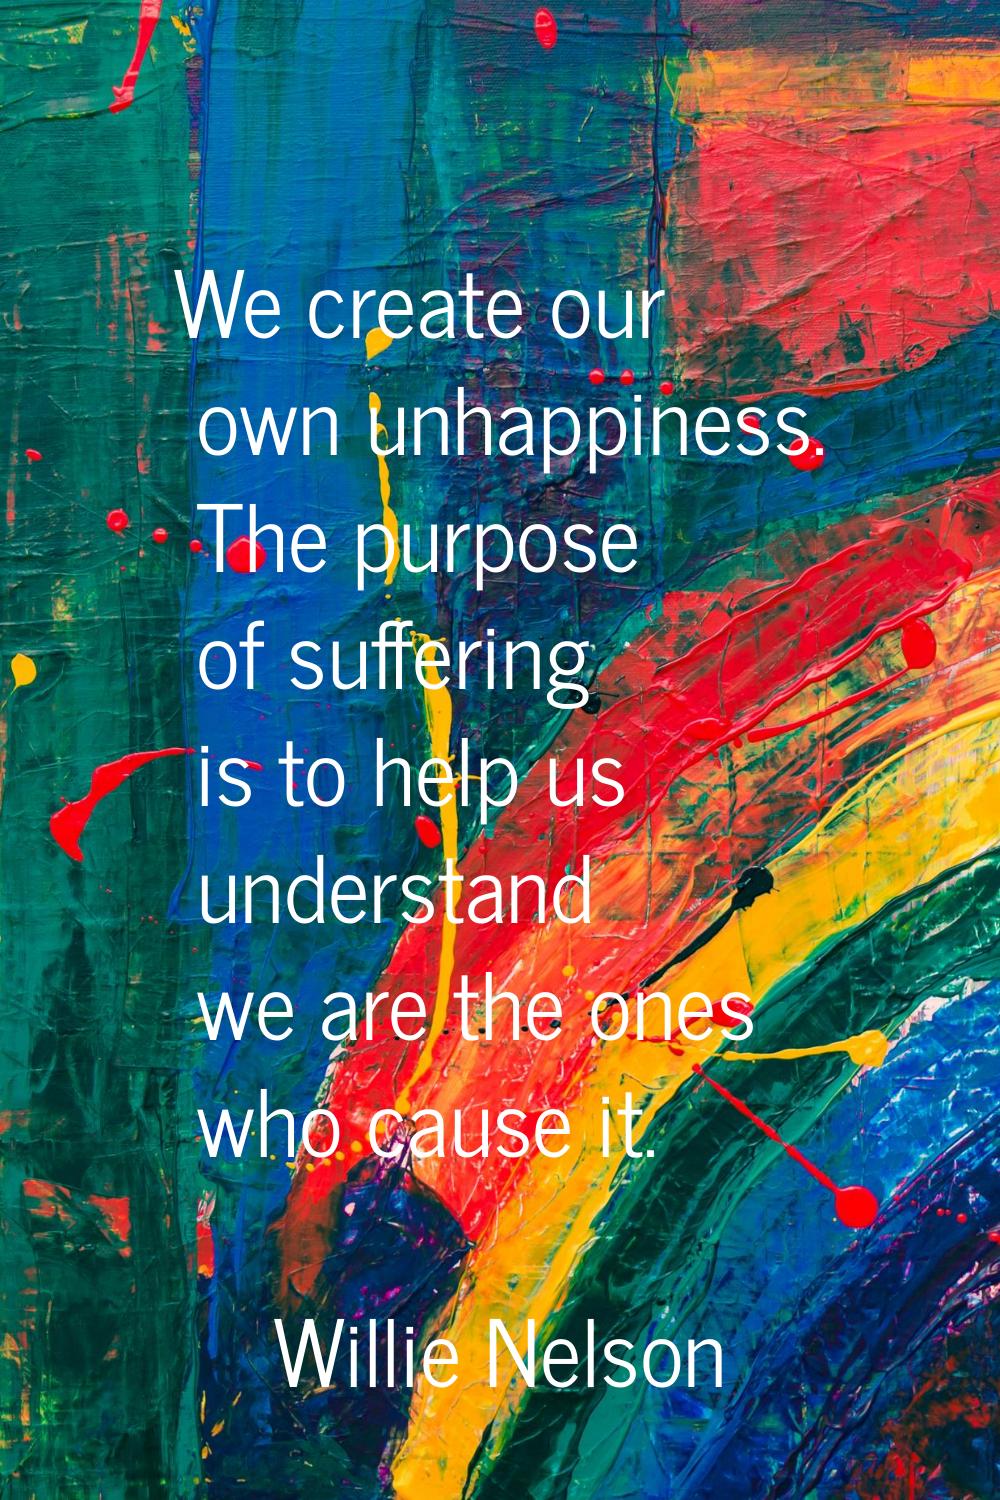 We create our own unhappiness. The purpose of suffering is to help us understand we are the ones wh